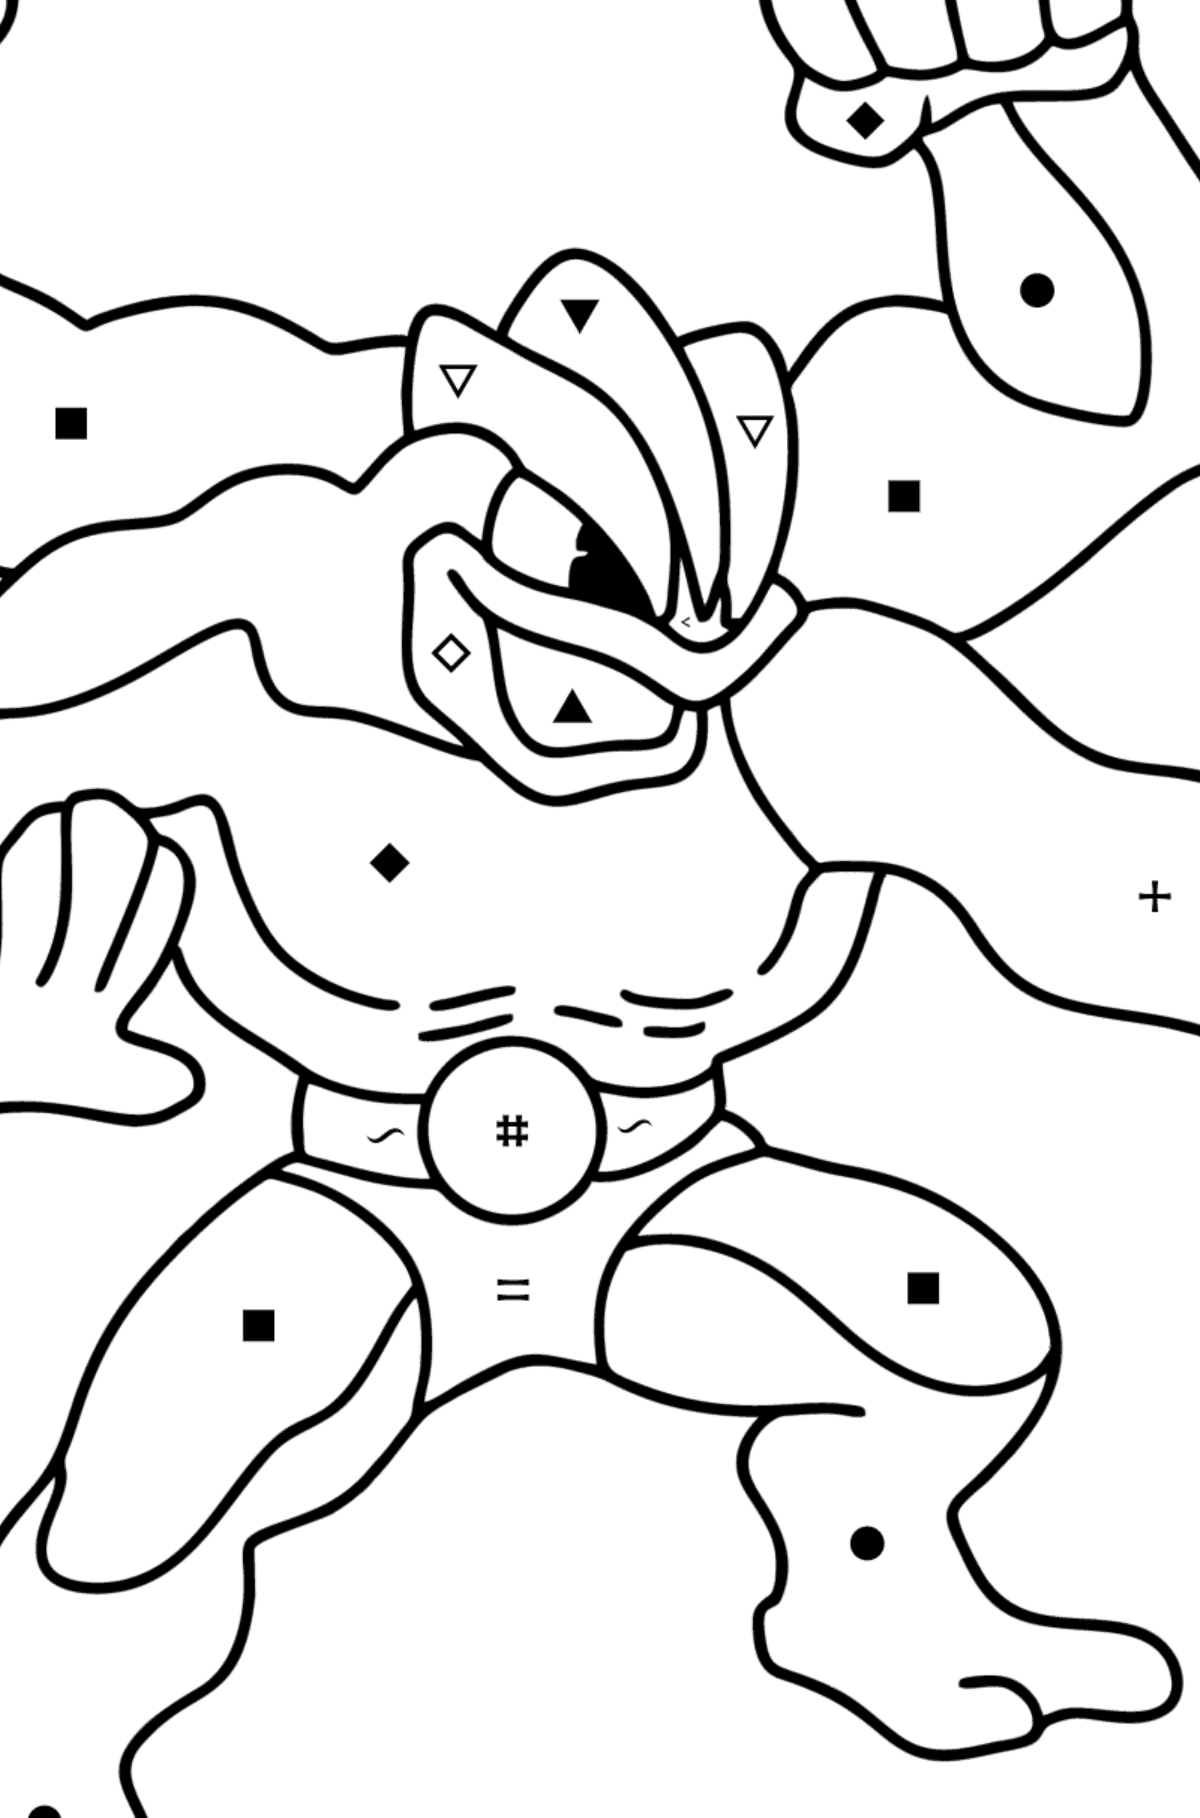 Coloring page Pokemon Go Machamp - Coloring by Symbols for Kids